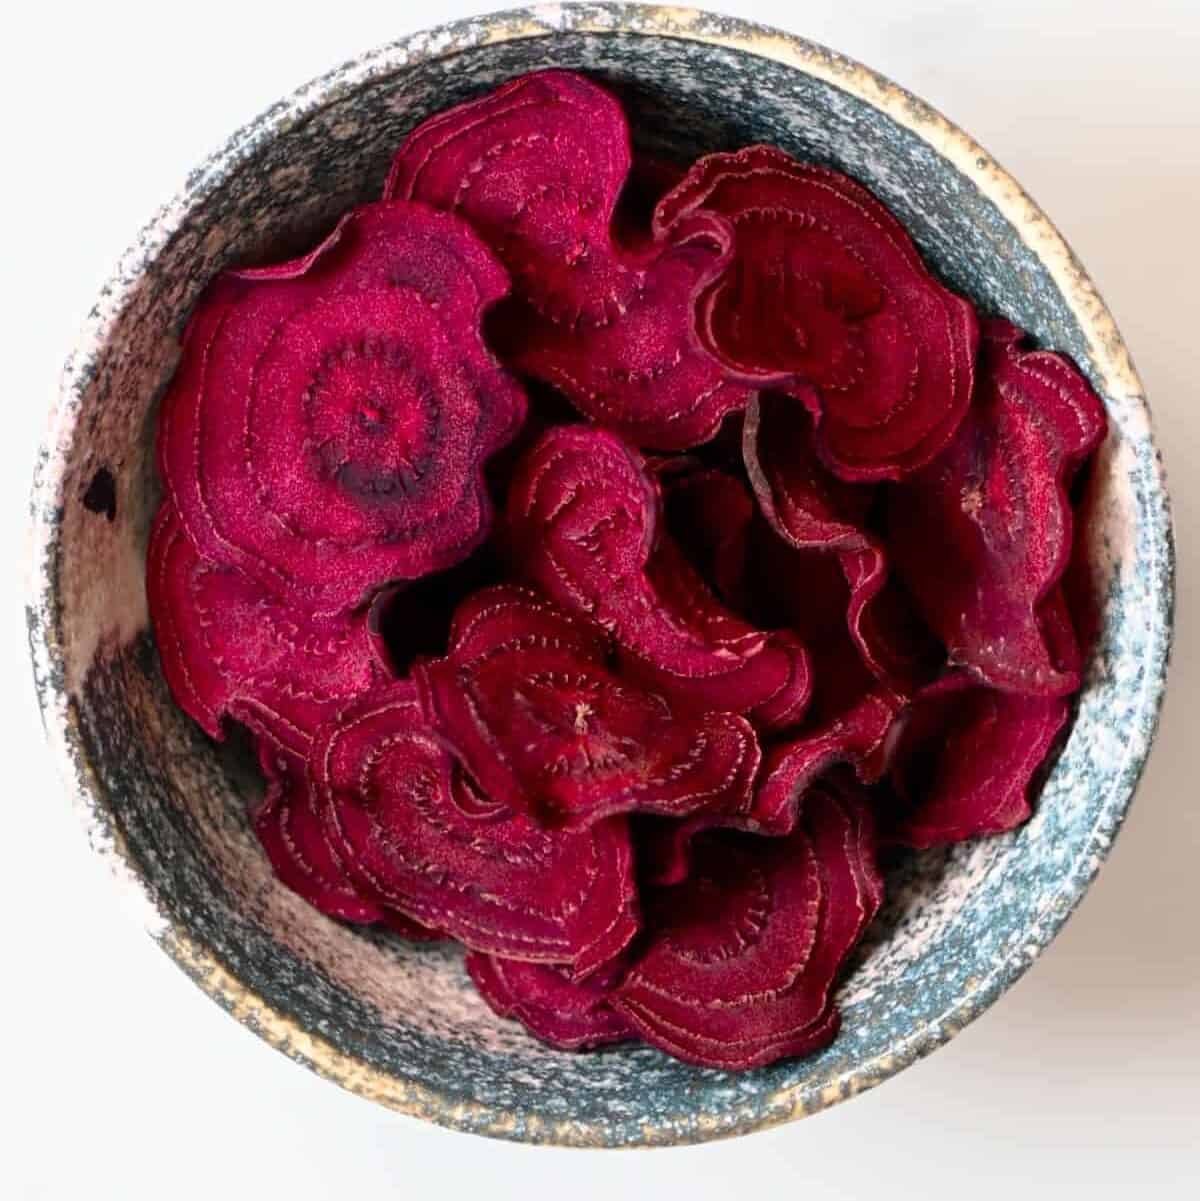 Homemade beetroot chips in a bowl